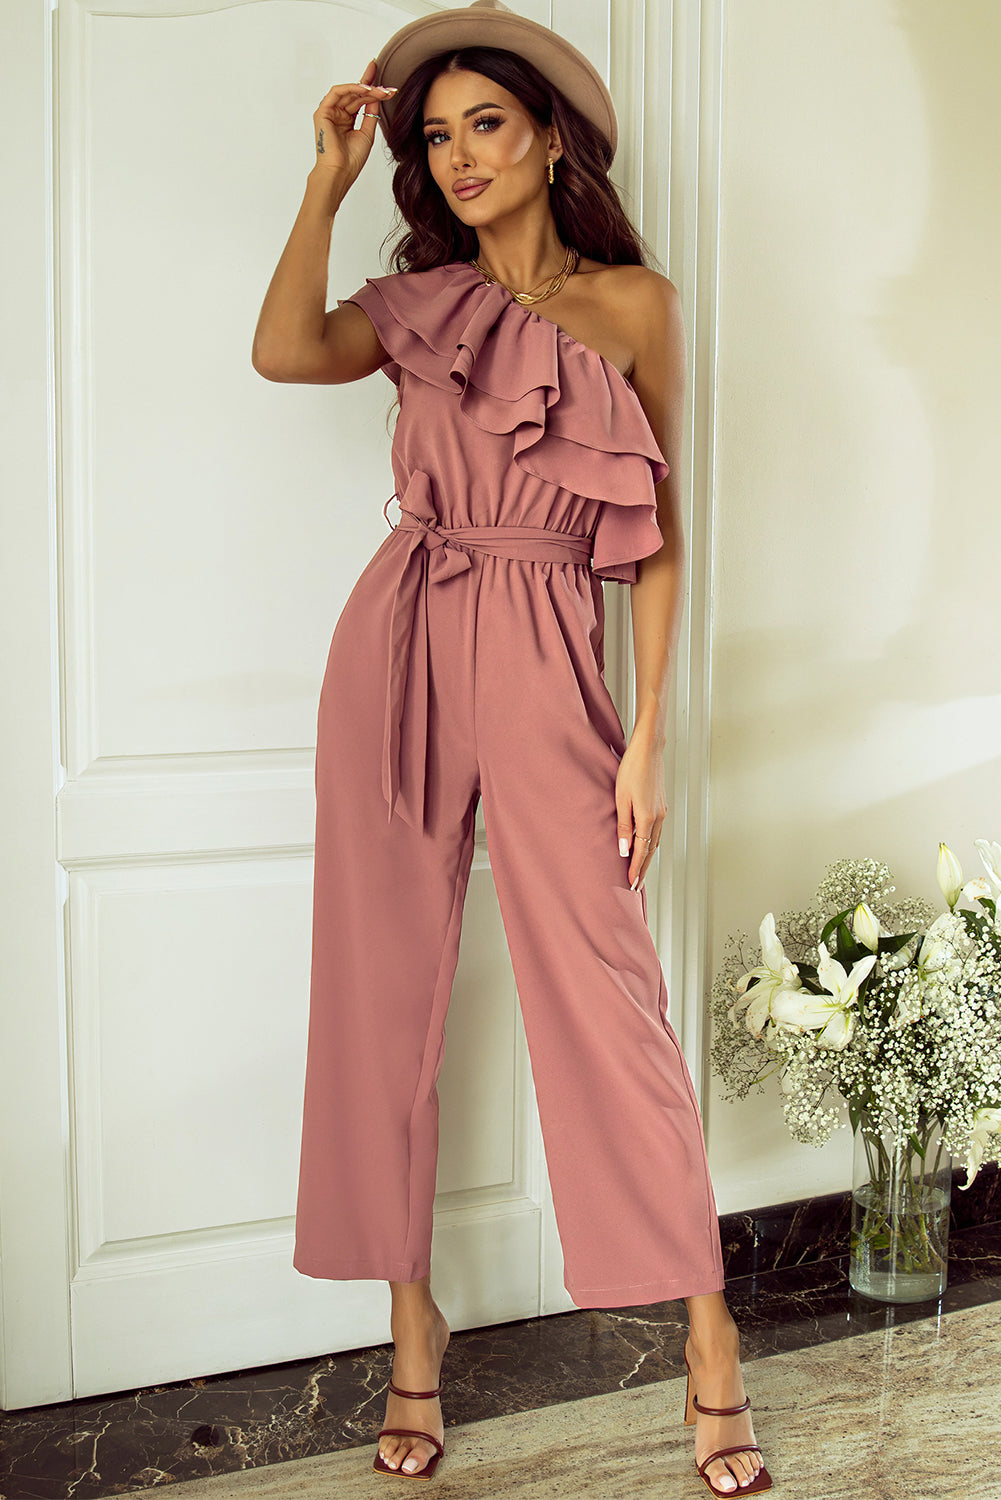 Sunset Vacation  Ruffled Tied One-Shoulder Jumpsuit  Sunset and Swim   